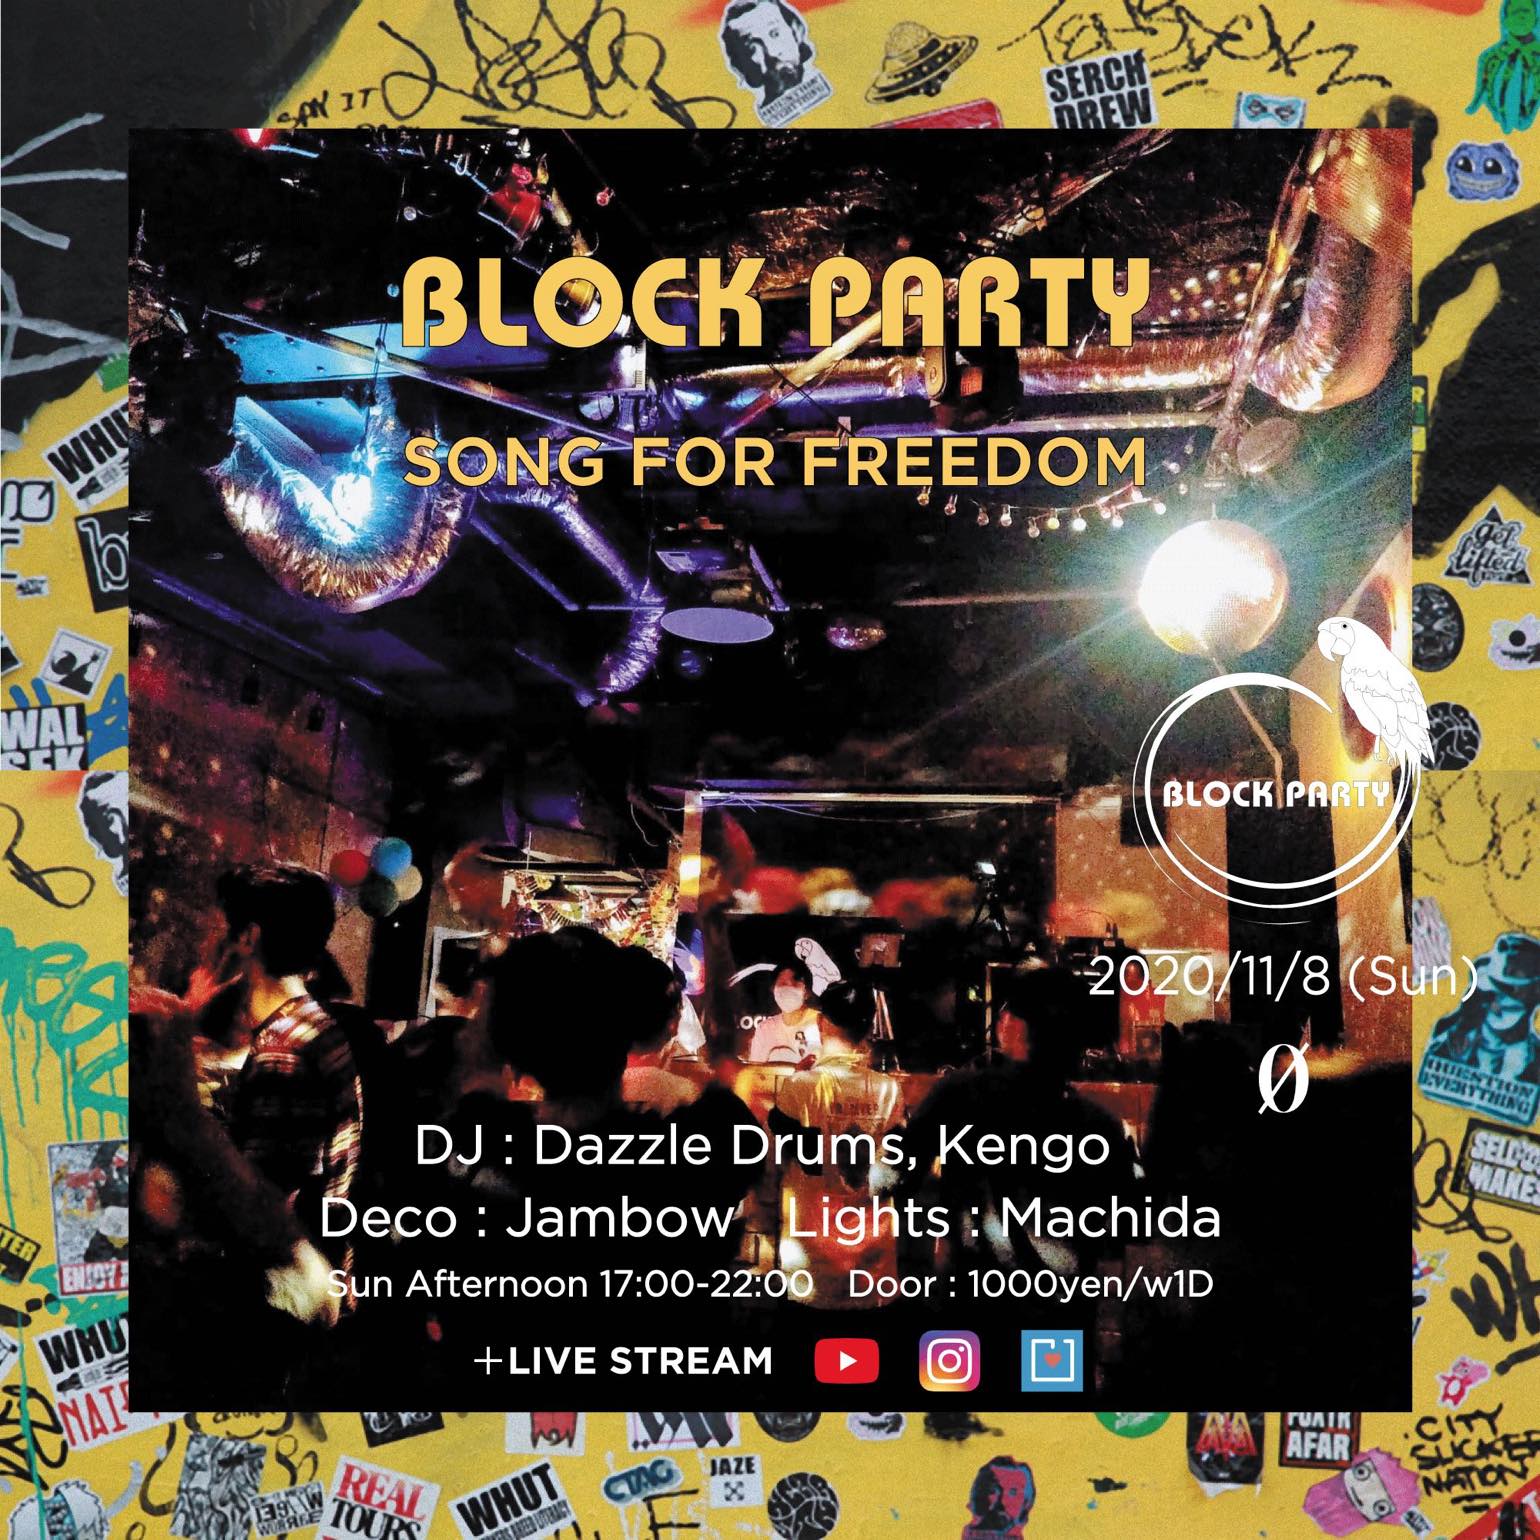 Block Party “Song For Freedom” + Live Stream @ 0 Zero